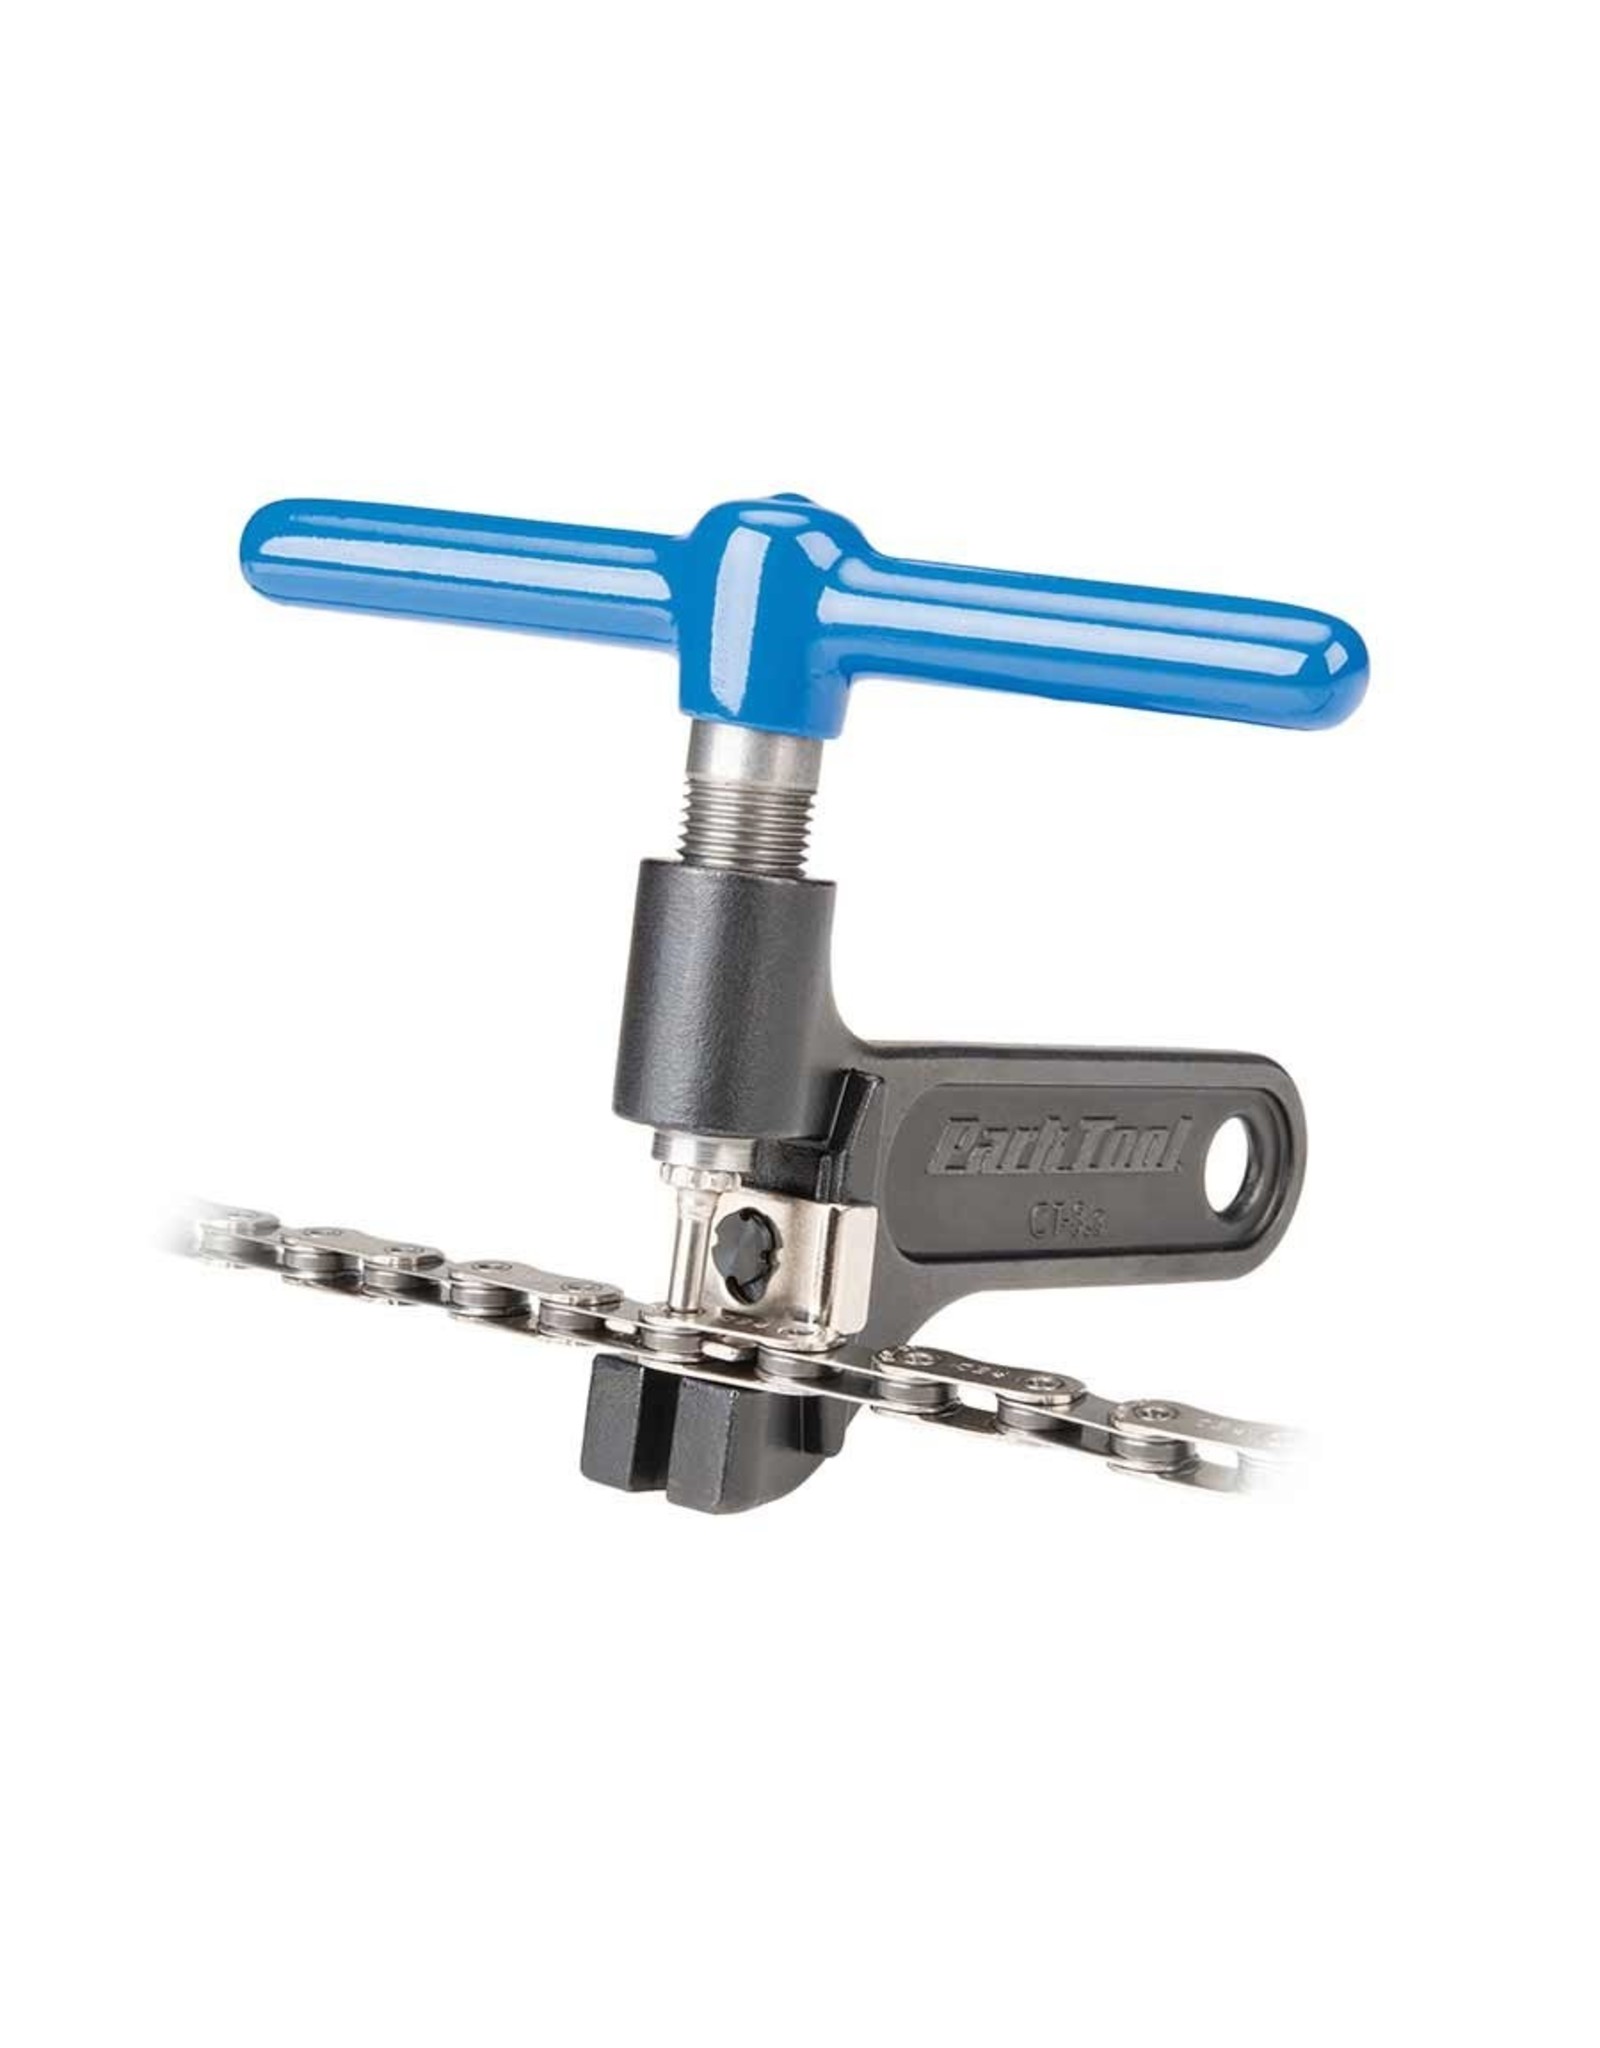 PARK TOOL Park Tool CT-3.3 Chain Tool - Compatibility: 5-12 Speed